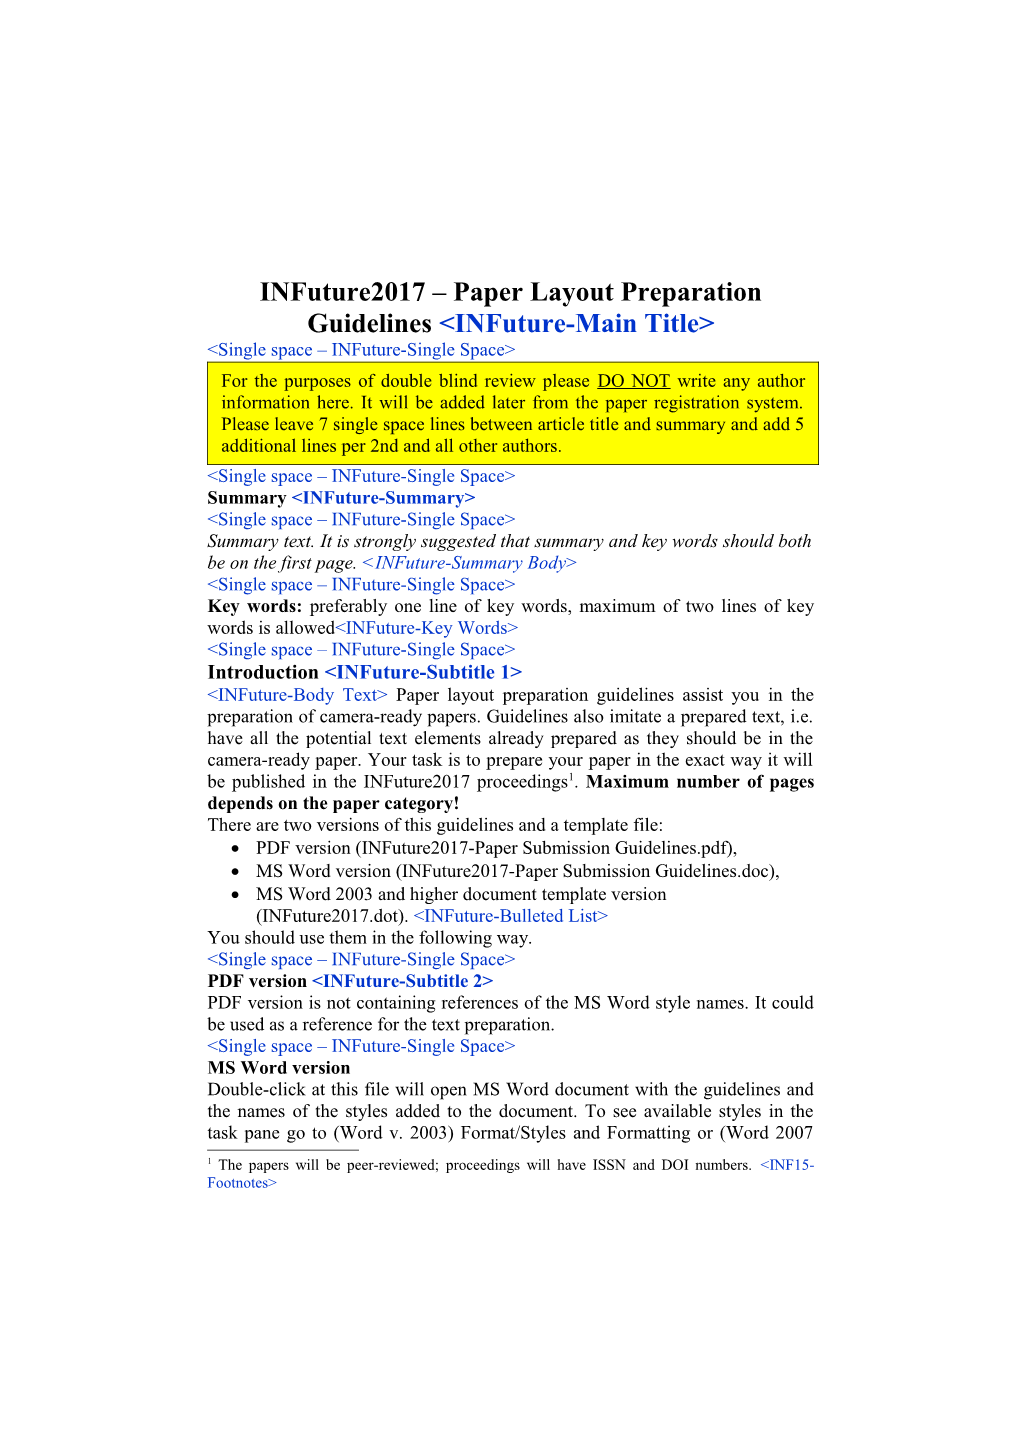 Infuture2015 - Paper Layout Preparation Guidelines